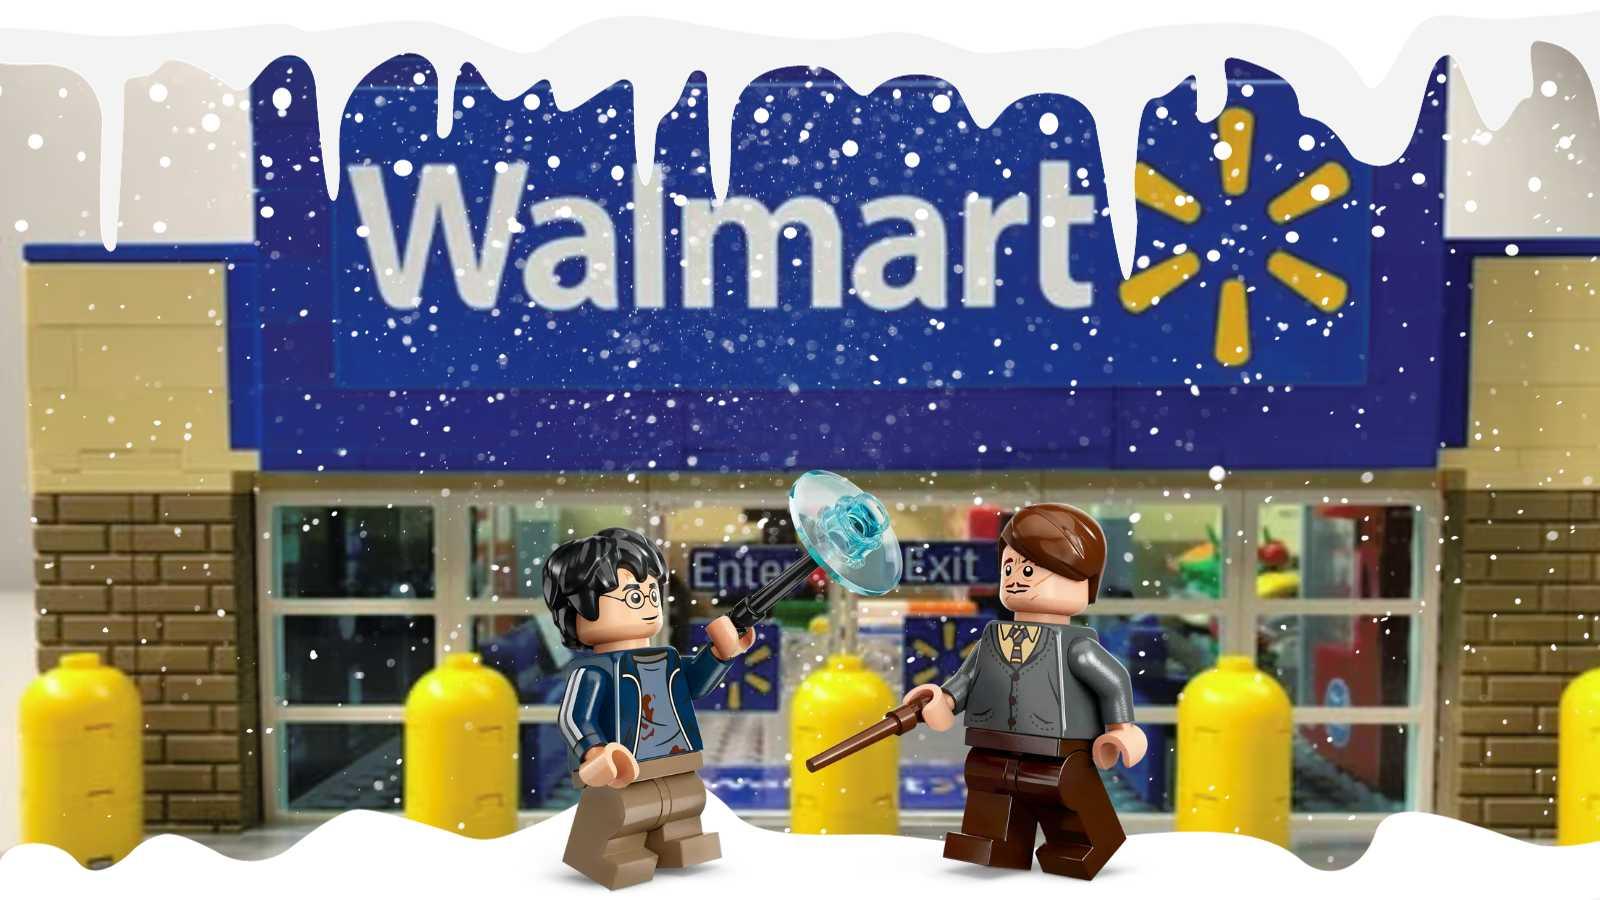 LEGO Harry Potter minifigures in front of Walmart background.